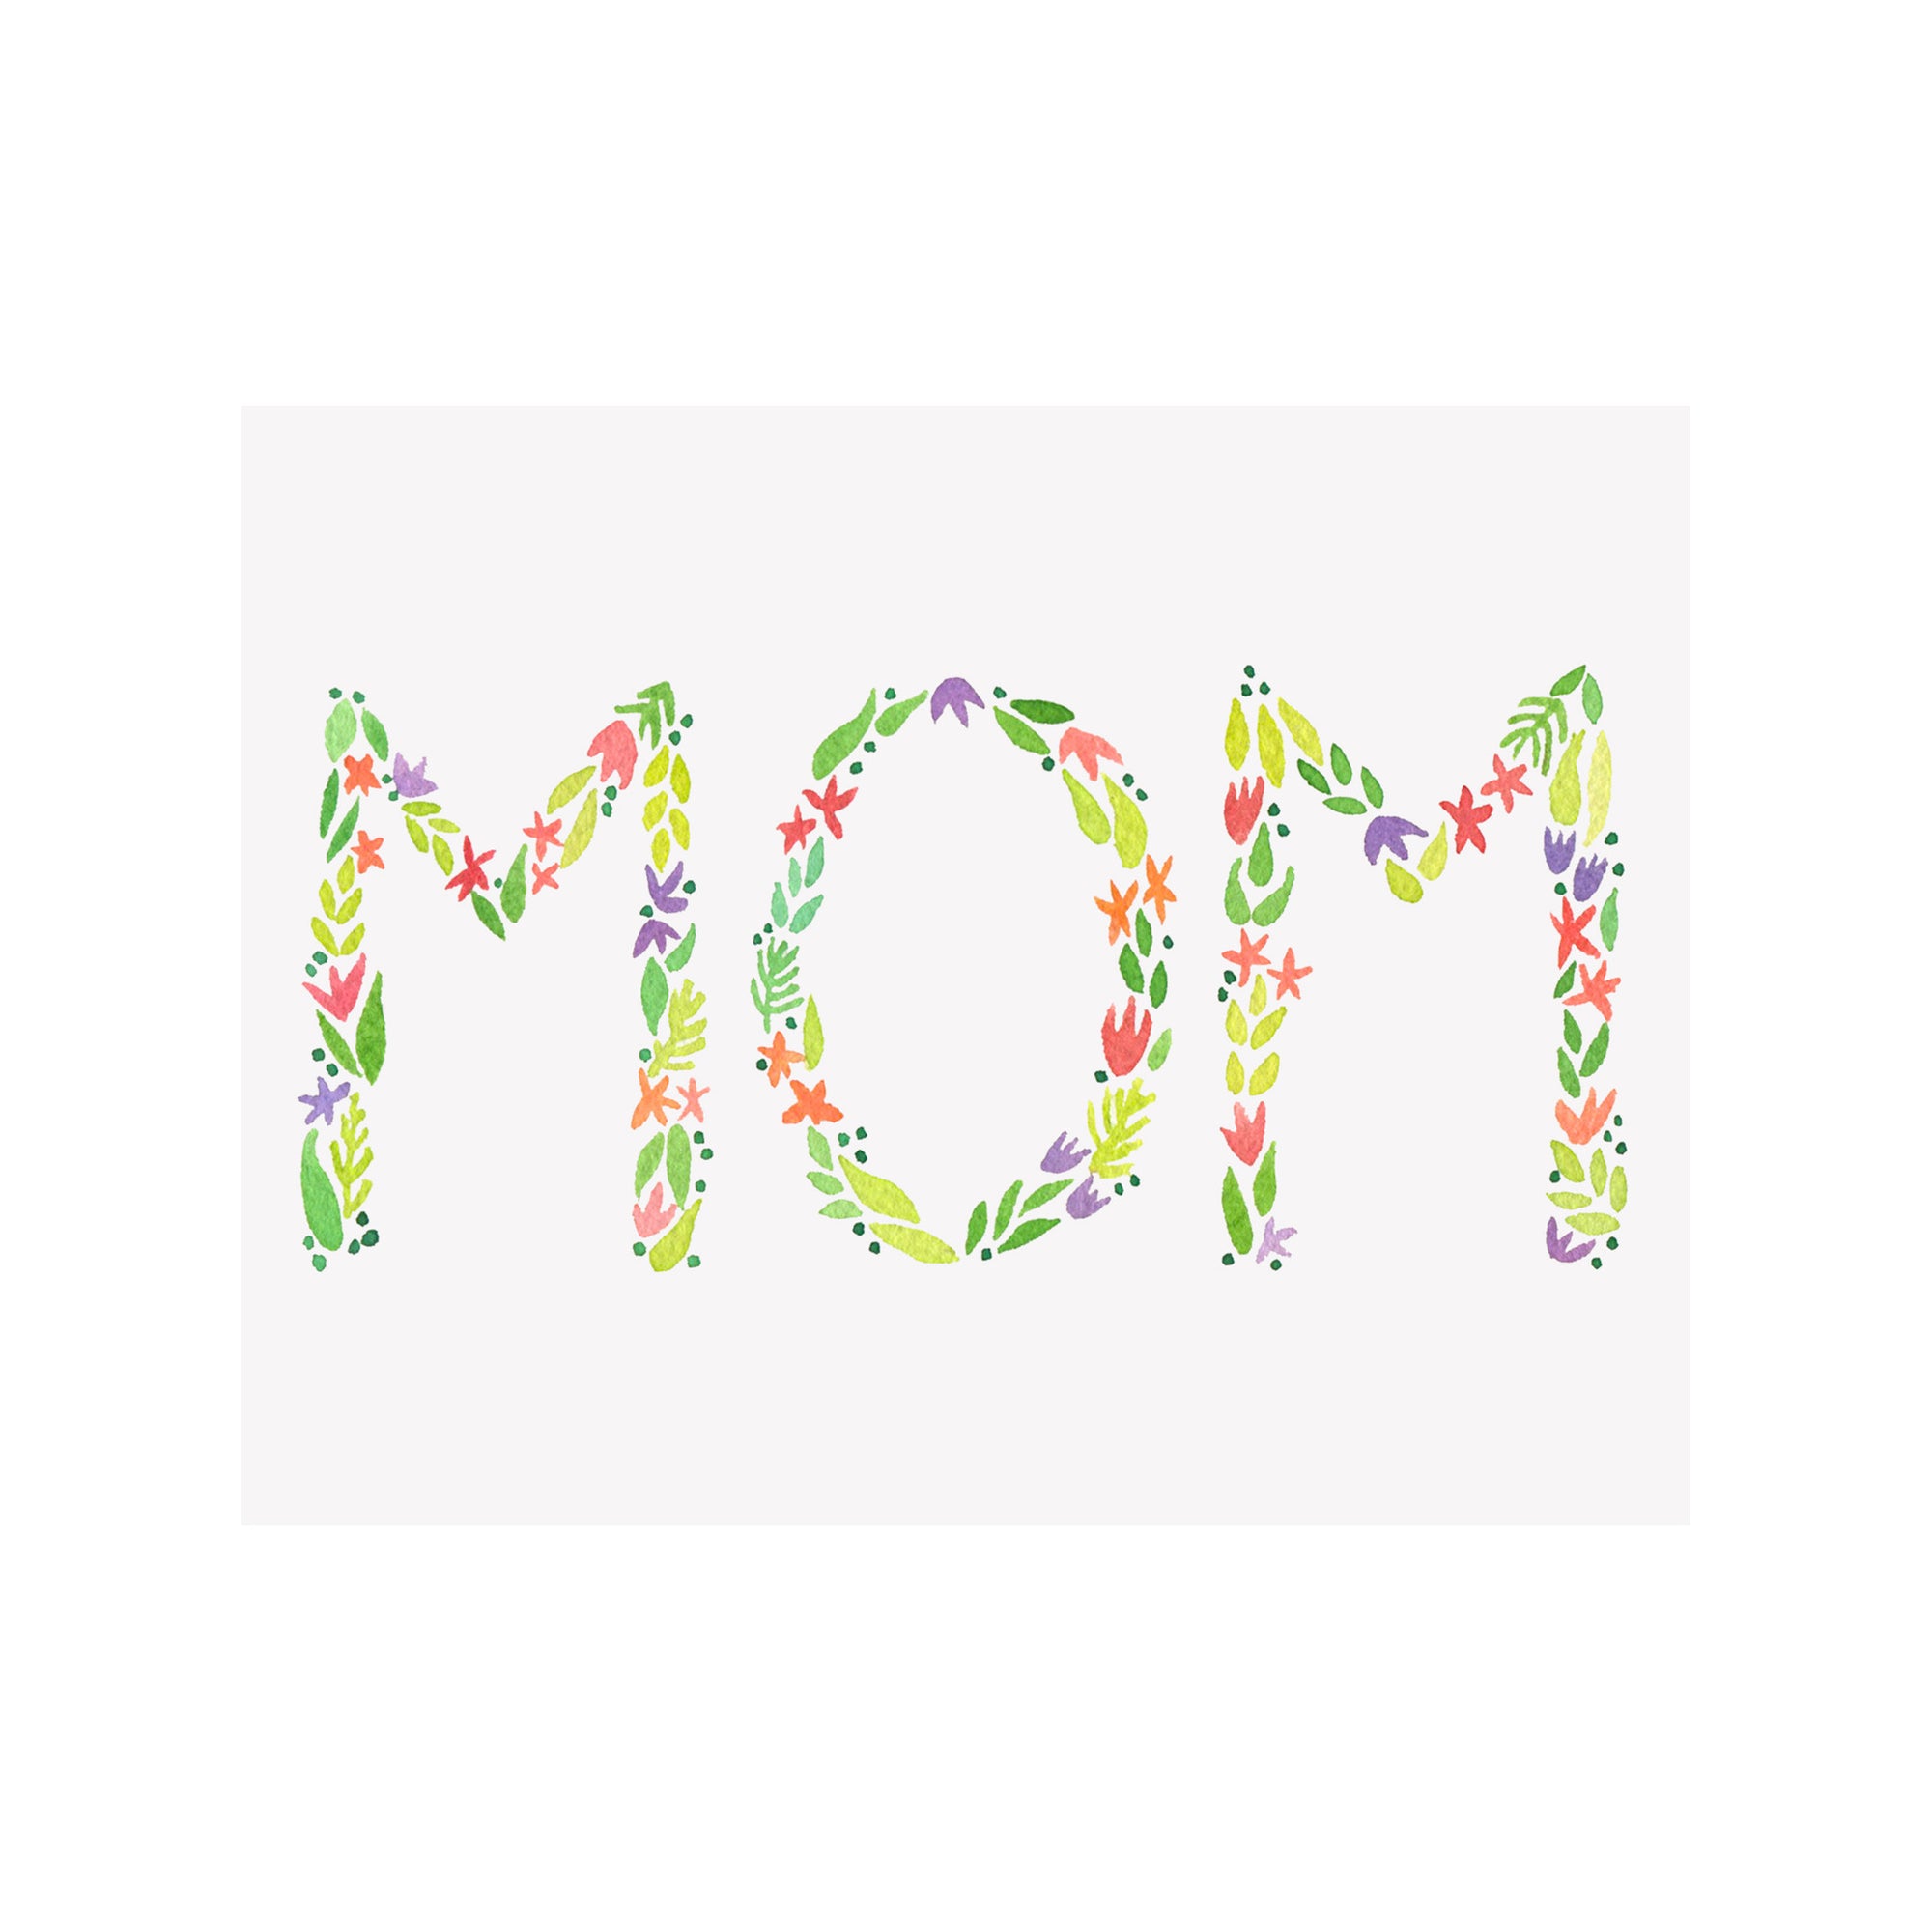 Flower Mom Mother's Day Card